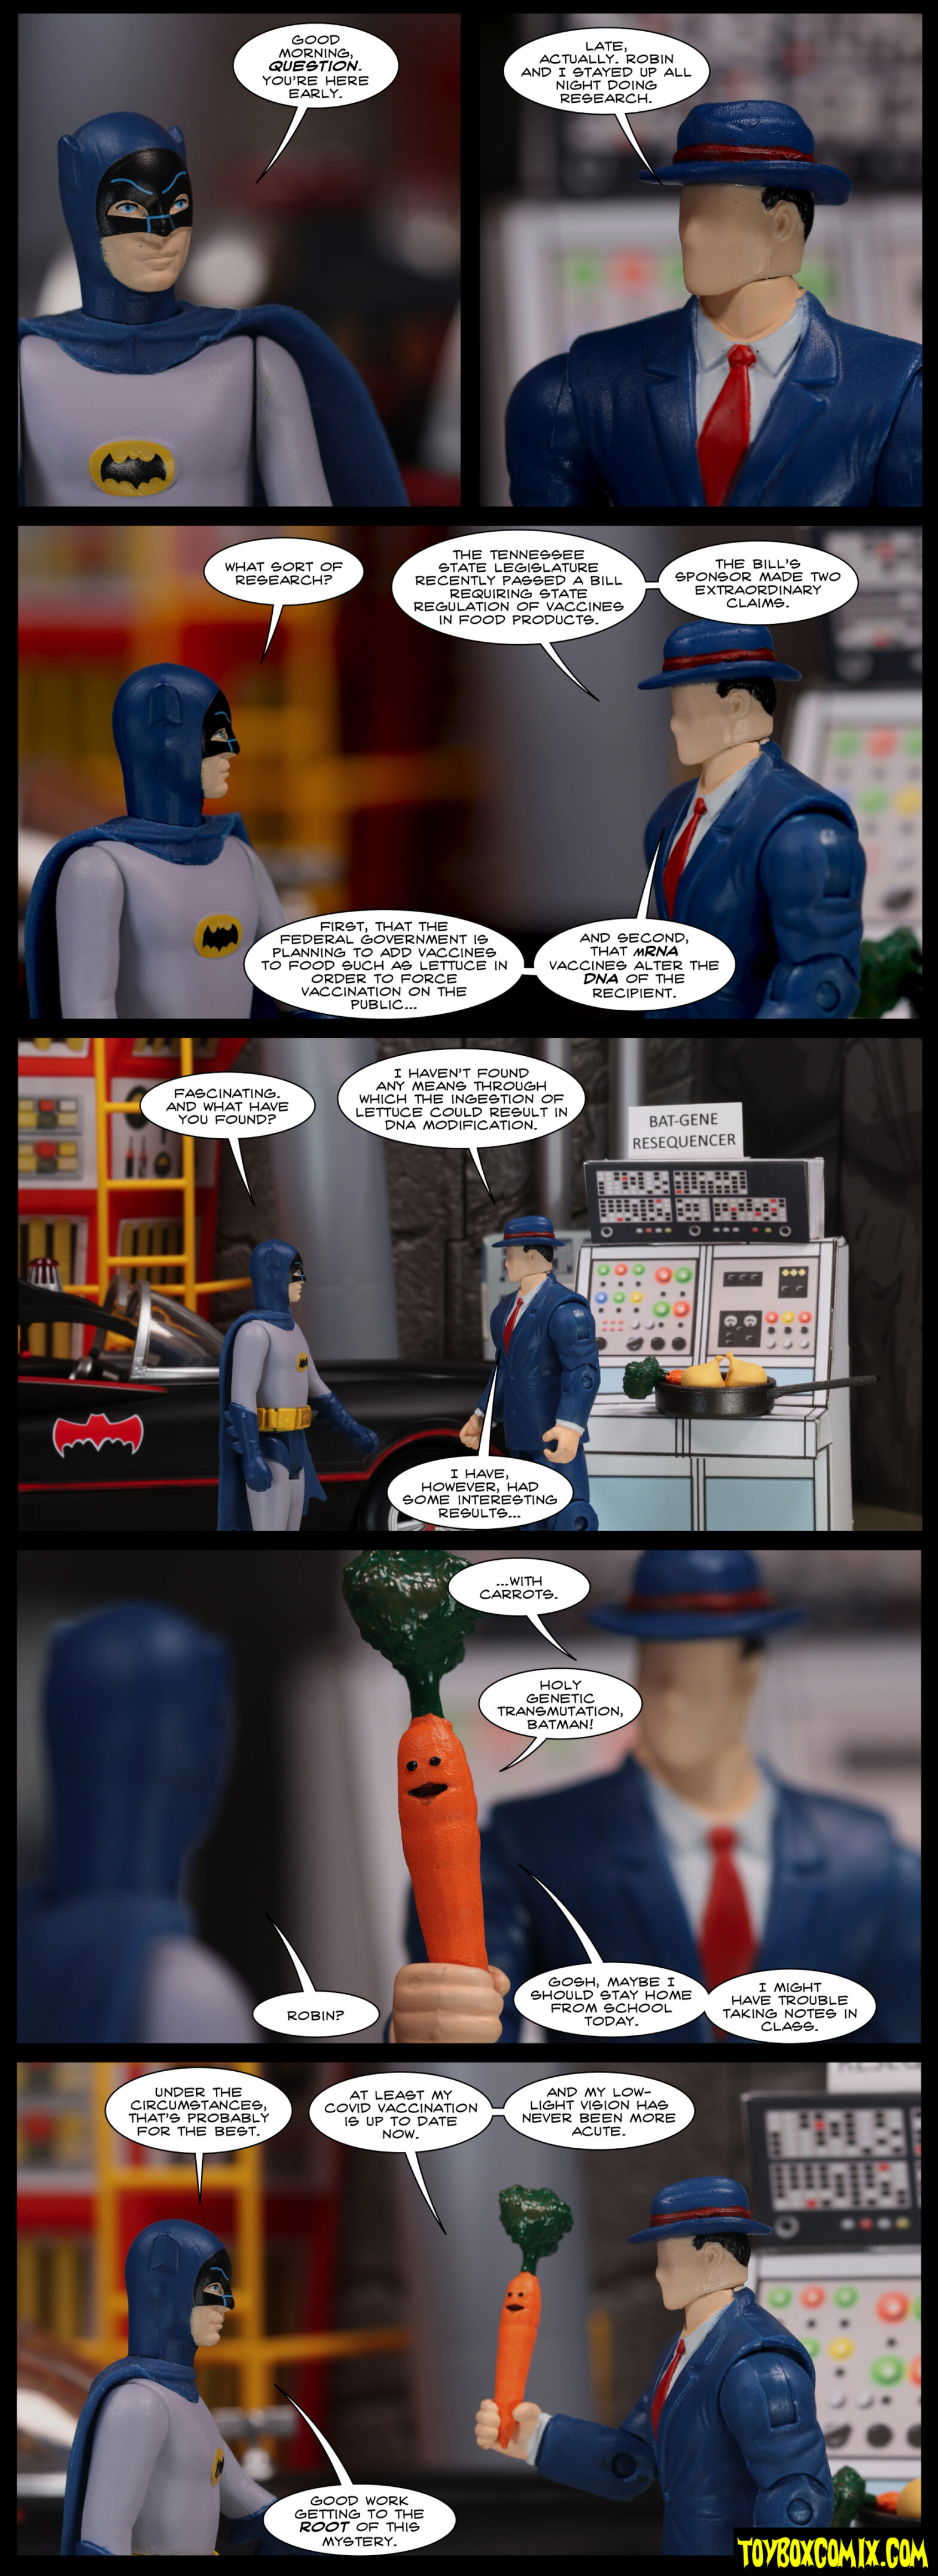 Location: Batcave (66) Panel 1: Batman (Adam West): “Good morning, Question. You’re here early.” Panel 2: The Question: “Late, actually. Robin and I stayed up all night doing research.” Panel 3: Batman: “What sort of research?” Question: “The Tennessee state legislature recently passed a bill requiring state regulations of vaccines in food products. The bill’s sponsor made two extraordinary claims. First, that the federal government is planning to add vaccines to food such as lettuce in order to force vaccination on the public…and second, that mRNA vaccines alter the DNA of the recipient.” Panel 4: Batman: “Fascinating. And what have you found?” Question (standing in front of a computer labelled “BAT-GENE RESEQUENCER” with a pile of vegetable): “I haven’t found any means through which the ingestion of lettuce could result in DNA modification. I have, however, had some interesting results…” Panel 5: Question, holding a carrot with a face: “…with carrots.” Carrot: “Holy genetic transmutation, Batman!” Batman: “Robon?” Carrot: “Gosh, maybe I should stay home from school today. I might have trouble taking notes in class.” Panel 6: Batman: “Under the circumstances, that’s probably for the best.” Carrot: “At least my COVID vaccination is up to date now. And my low-light vision has never been more acute.” Batman: “Good work getting to the root of this mystery.”